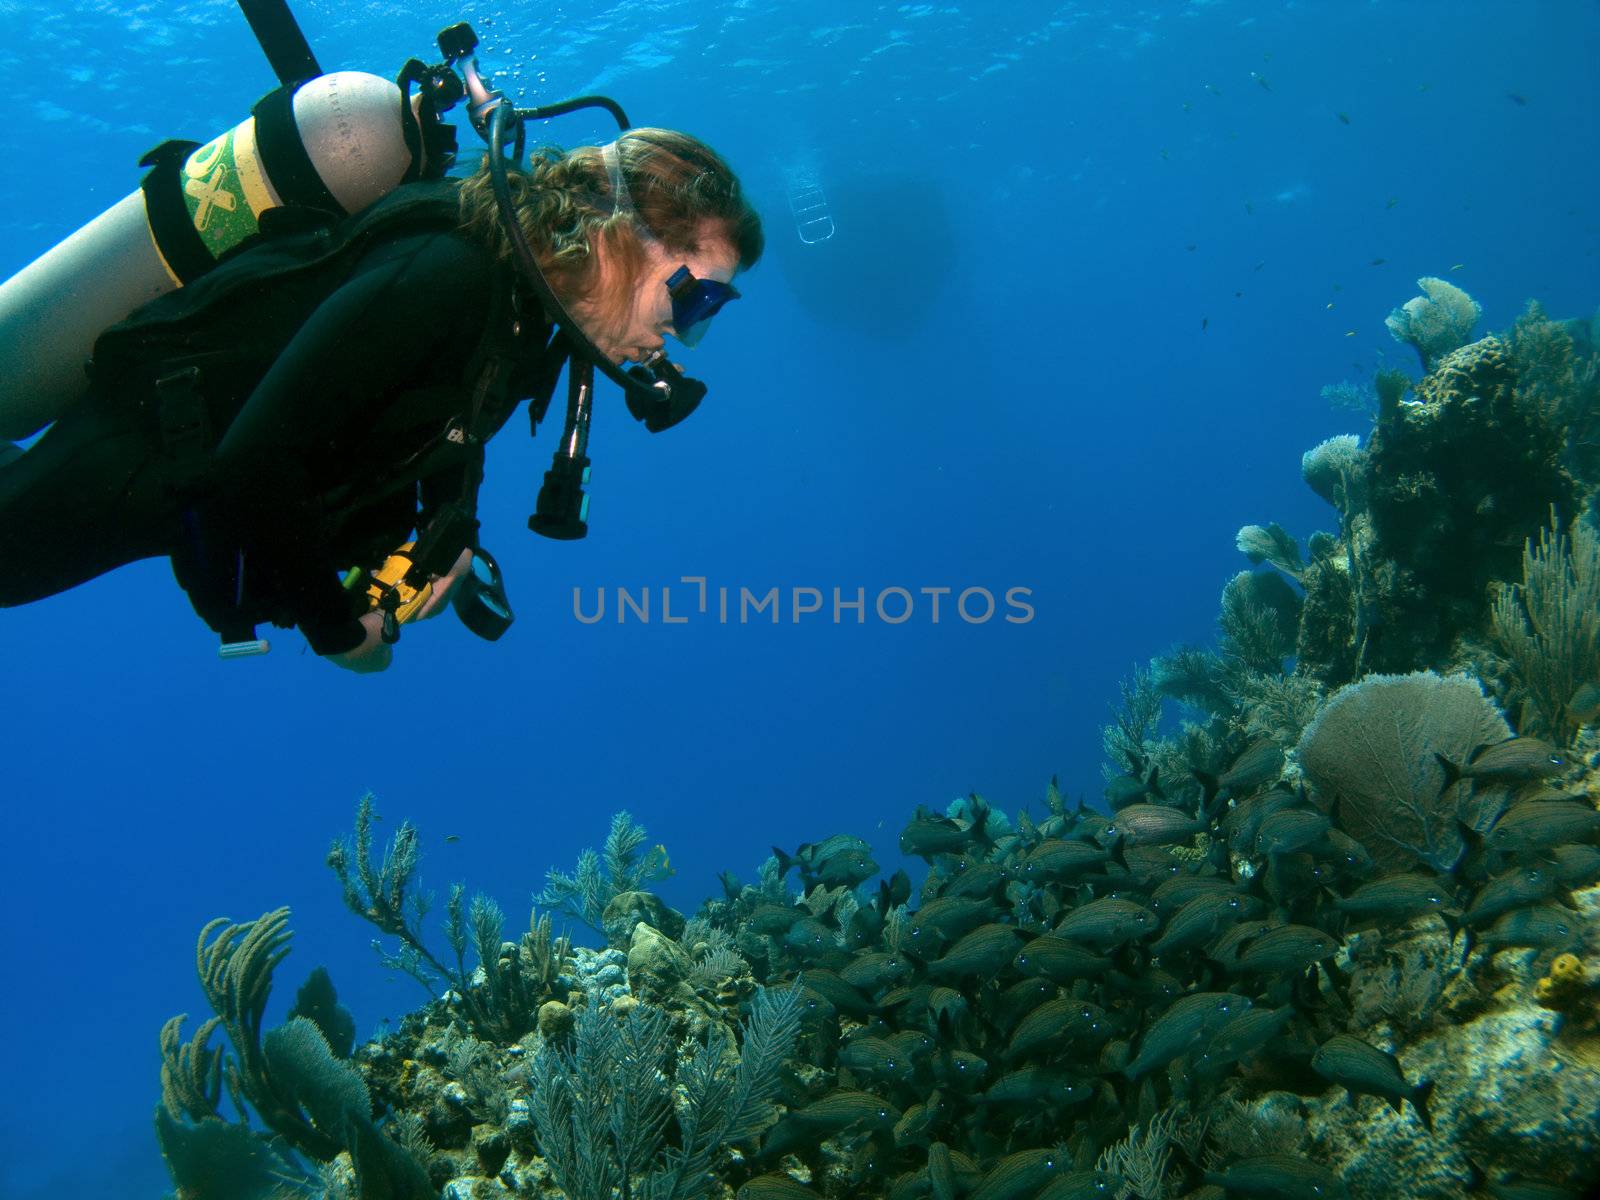 Woman Scuba Diver looking at A School of Fish by KevinPanizza